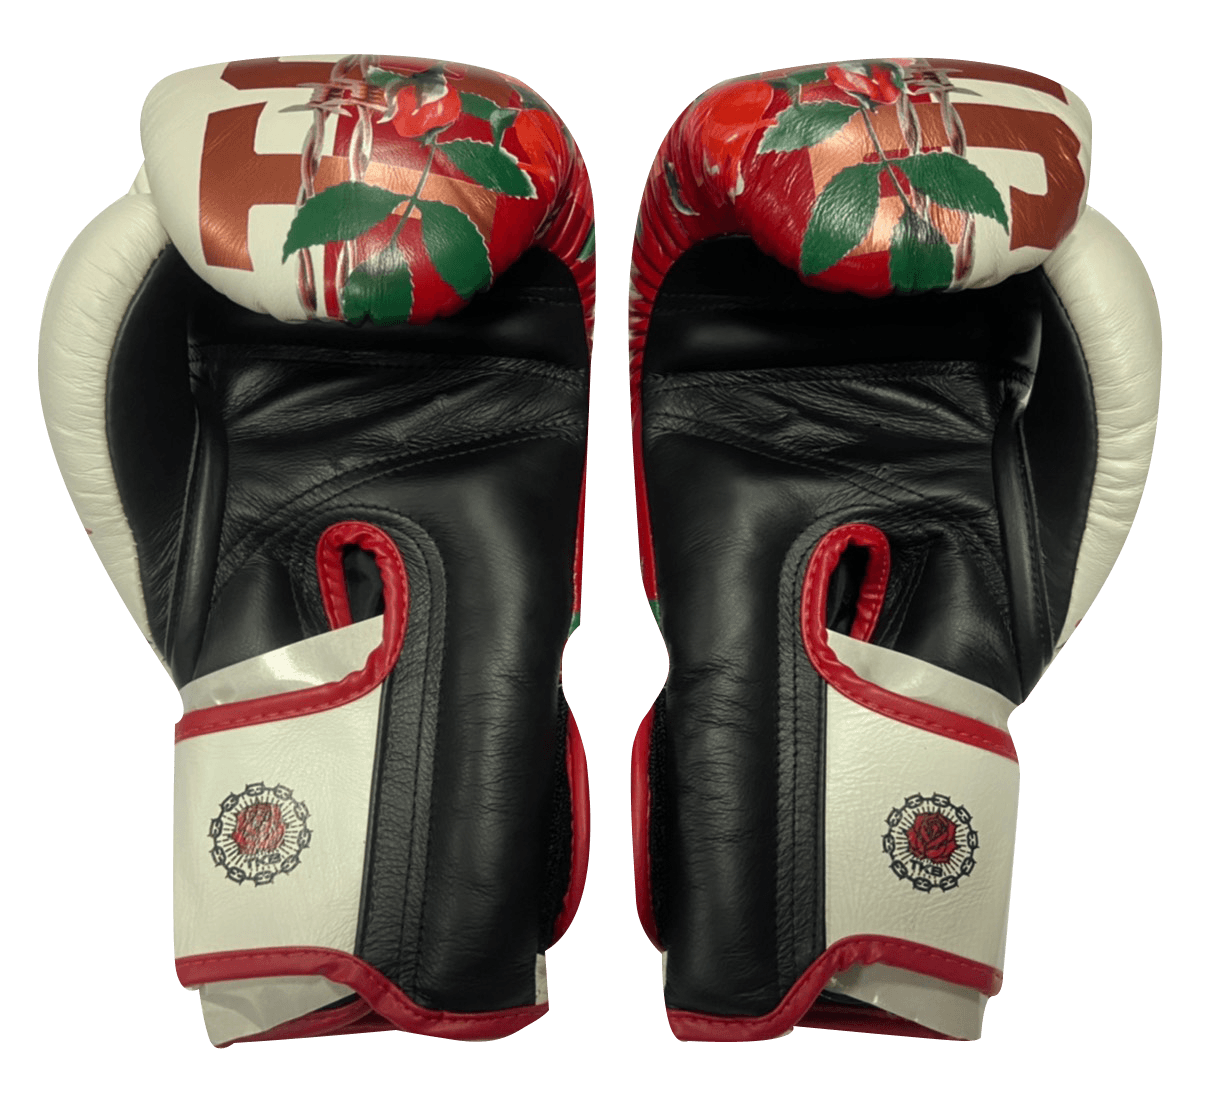 Top King Boxing Gloves TKBGWS White Red World Series - SUPER EXPORT SHOP